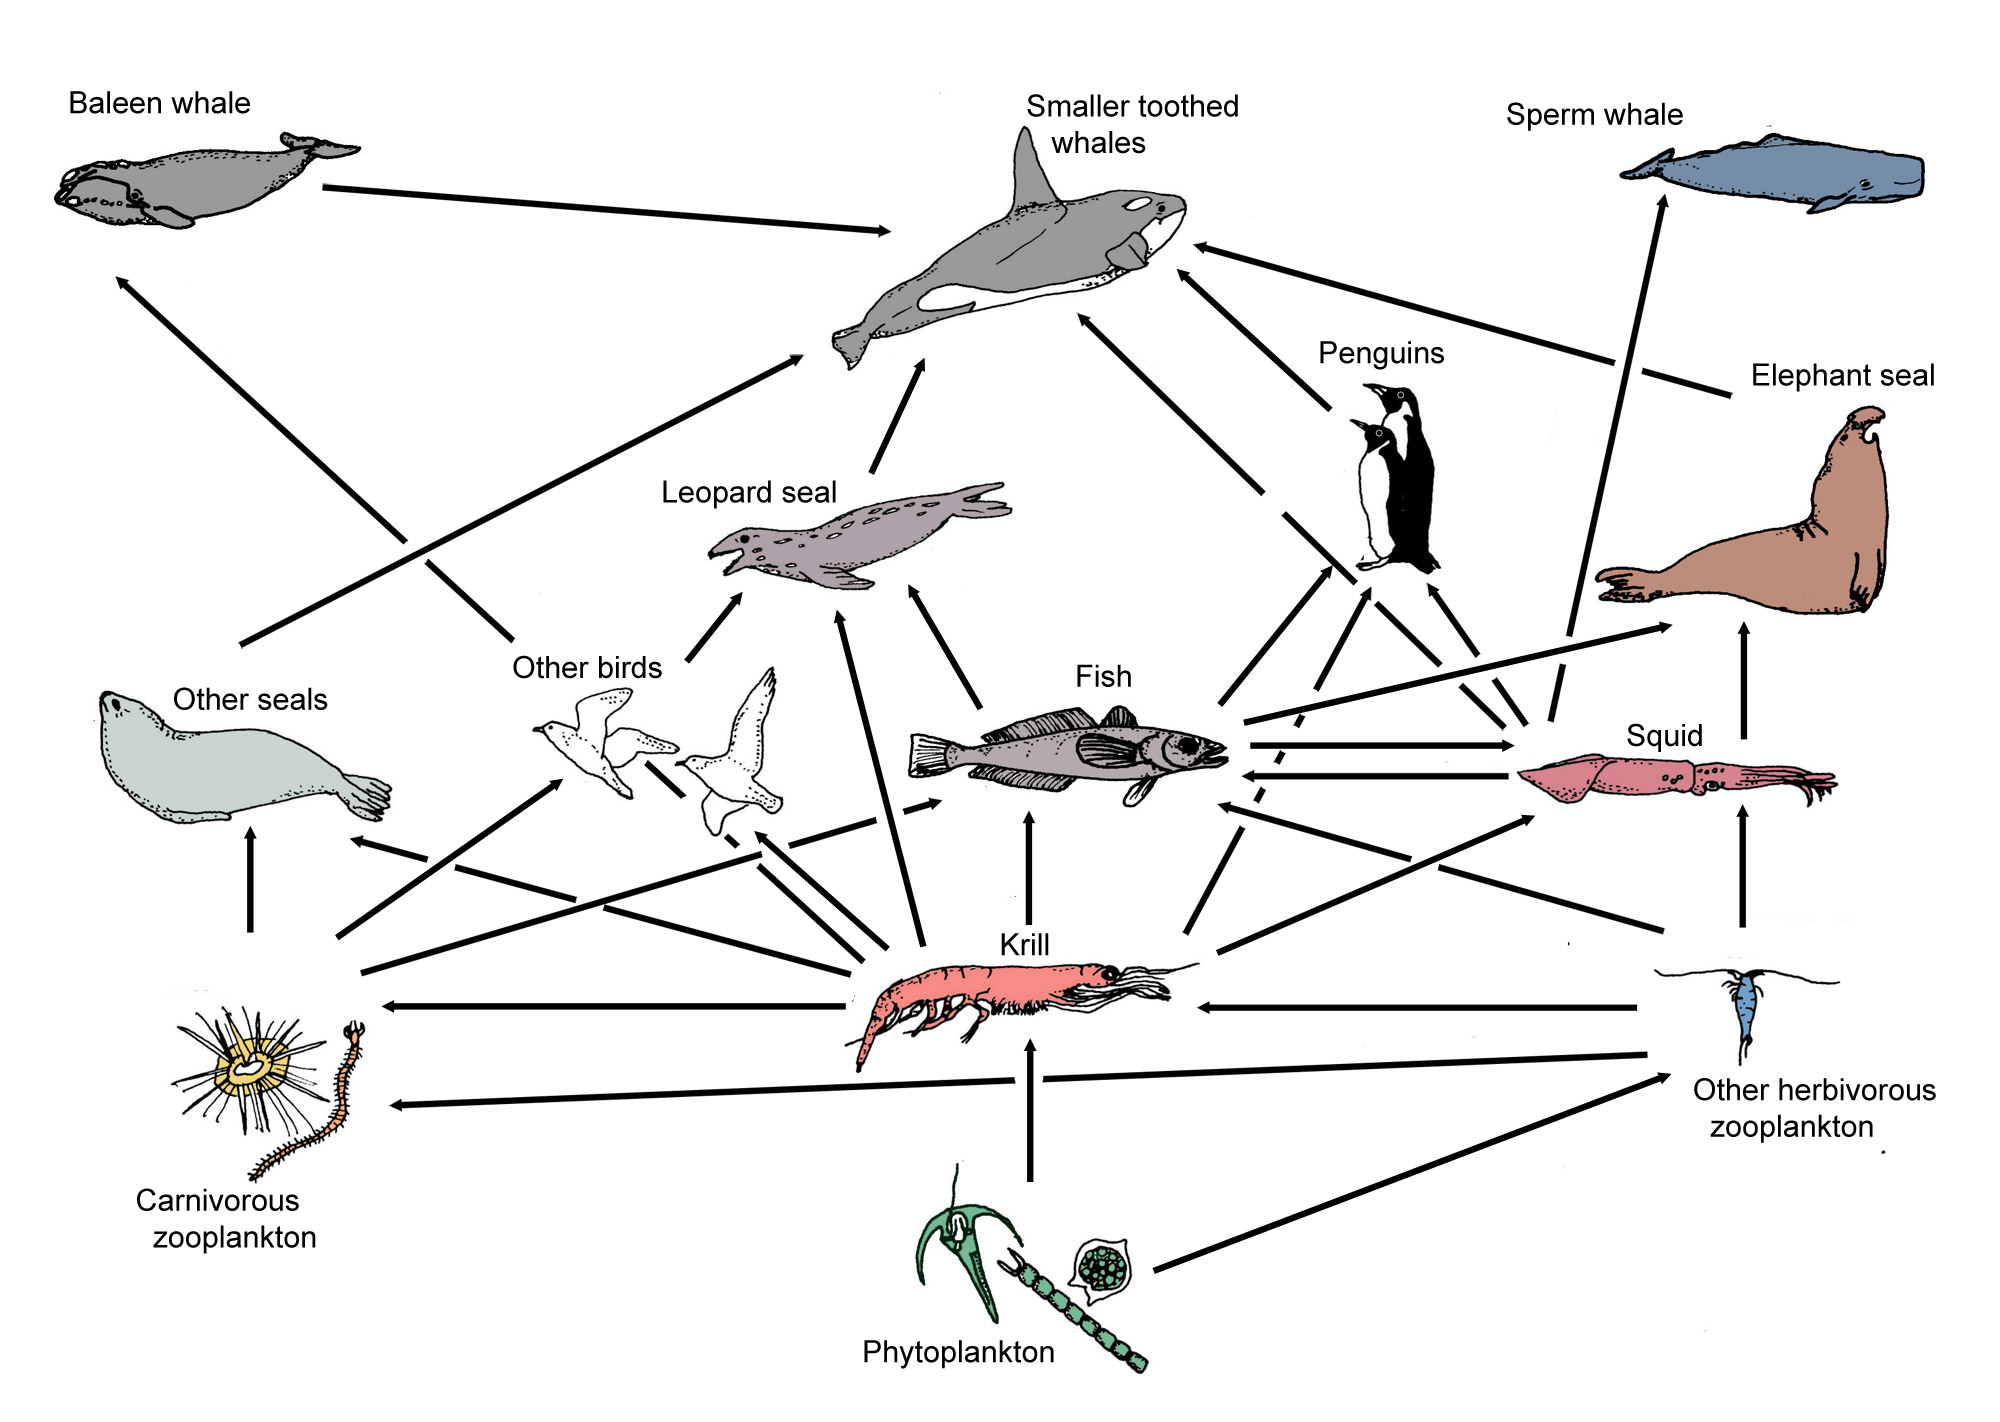 Trophic Level Diagram Food Web Diagram Labeled Trophic Levels With Different Colors